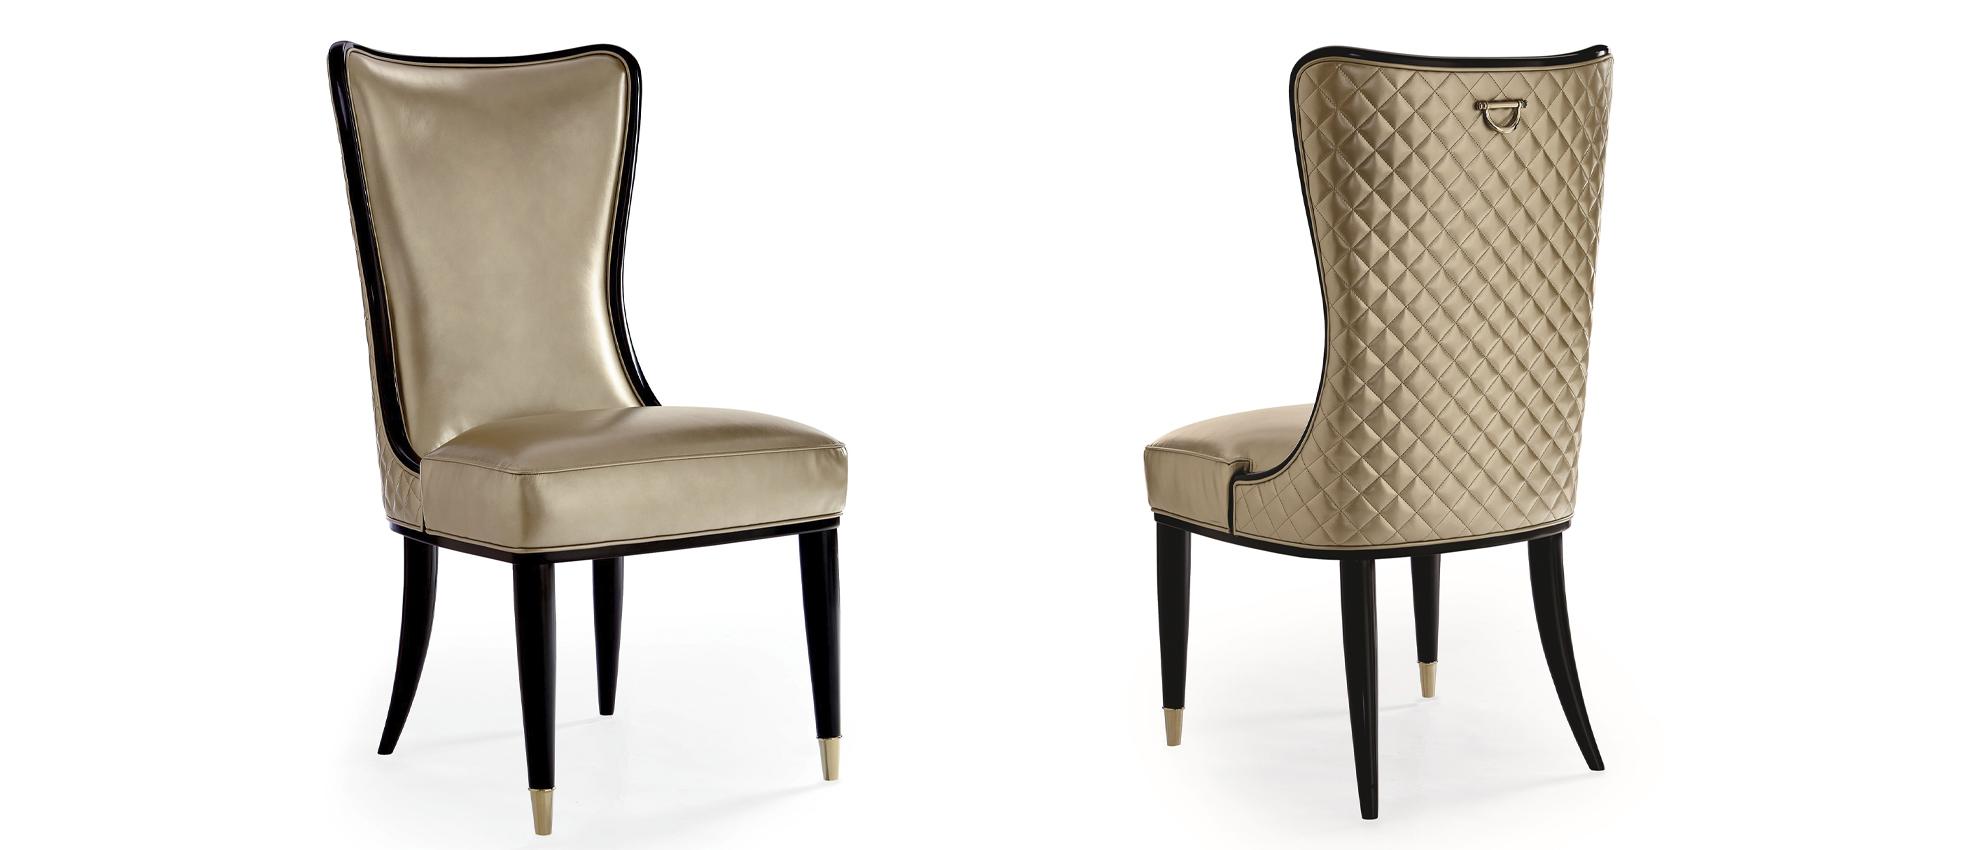   SOPHISTICATES DINING CHAIR  